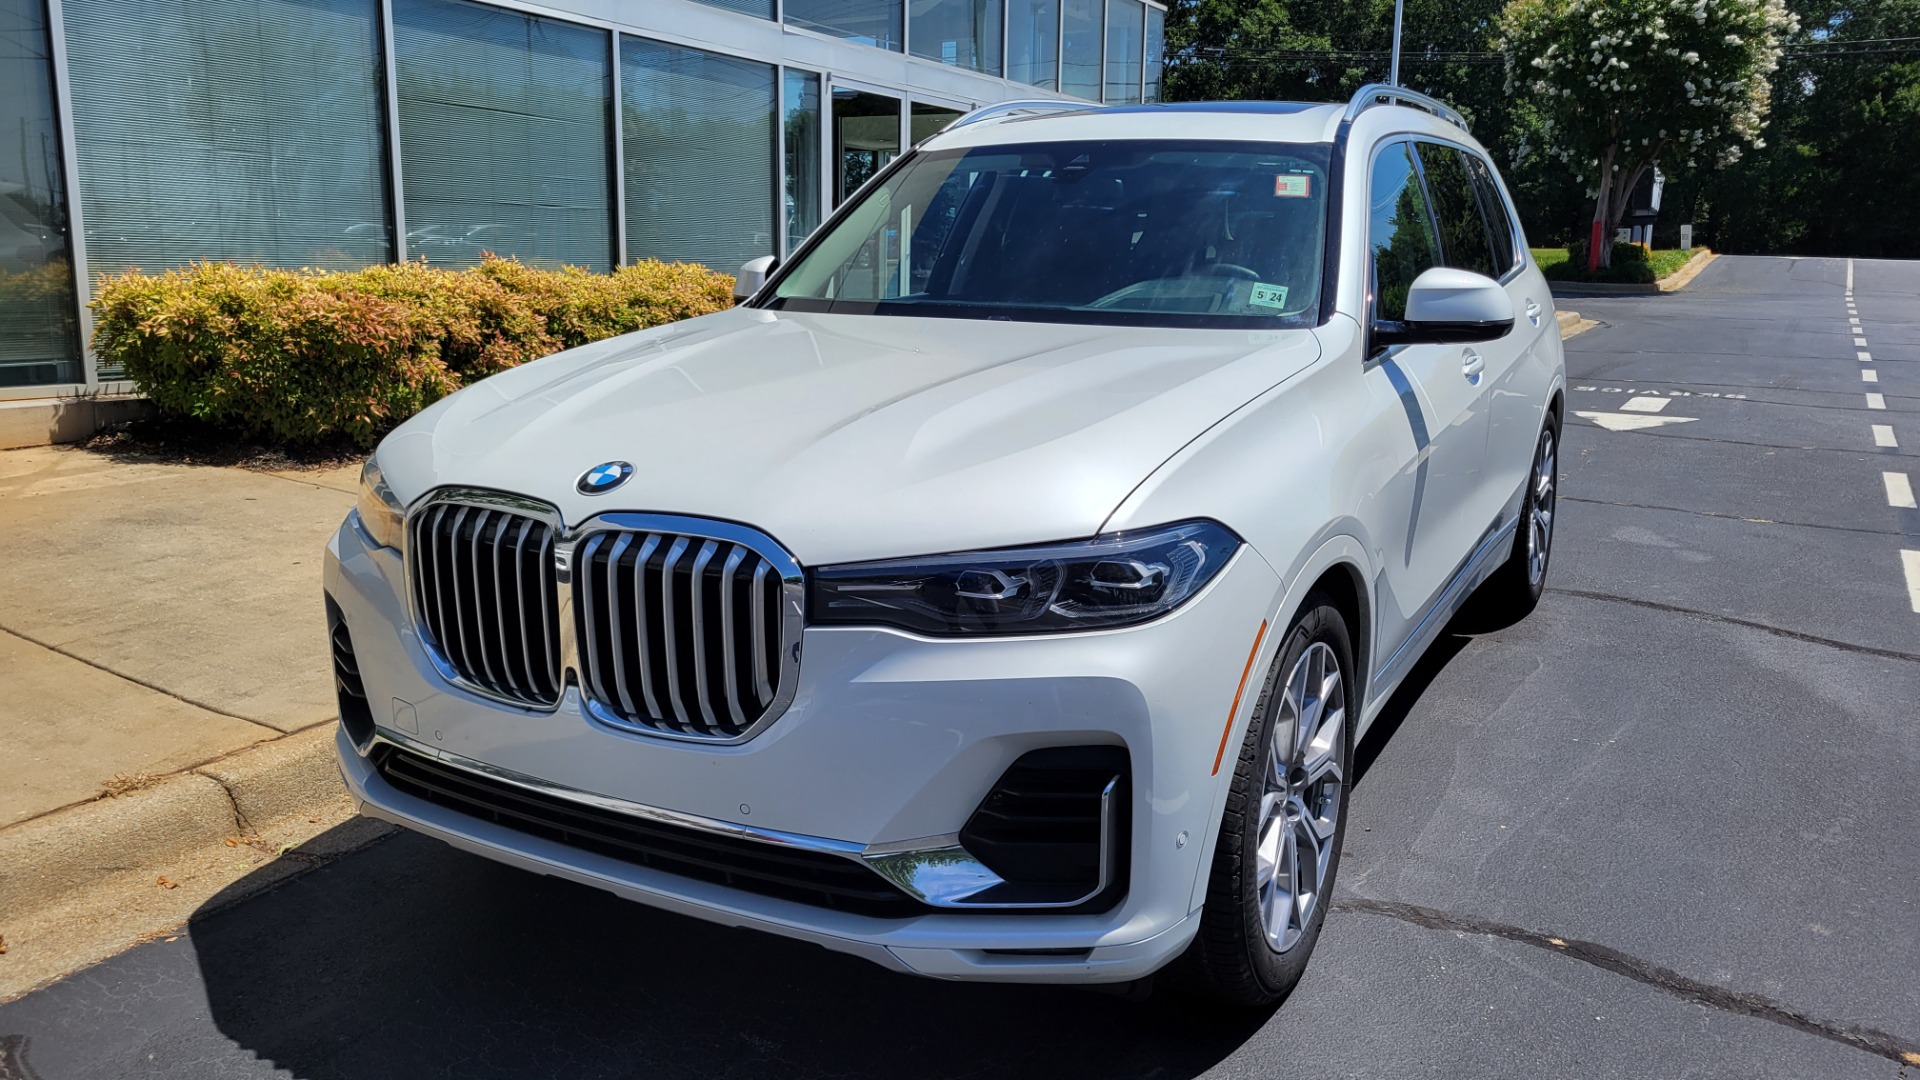 Used 2019 BMW X7 XDRIVE40I PREMIUM / NAV / HUD / PARK ASST PLUS / REMOTE START / 3D VIEW for sale $68,995 at Formula Imports in Charlotte NC 28227 2